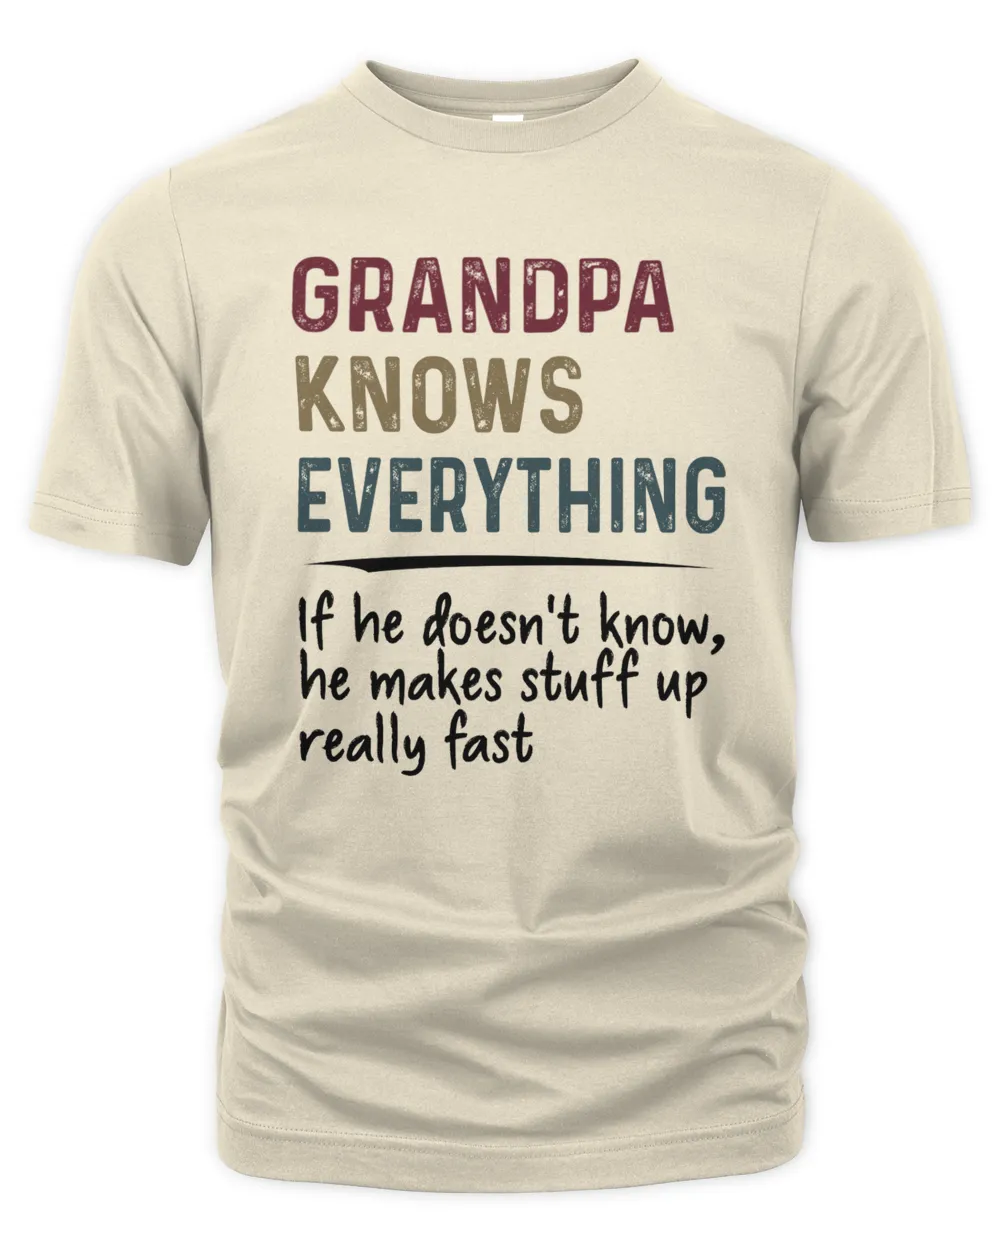 [Personalize] Know everything